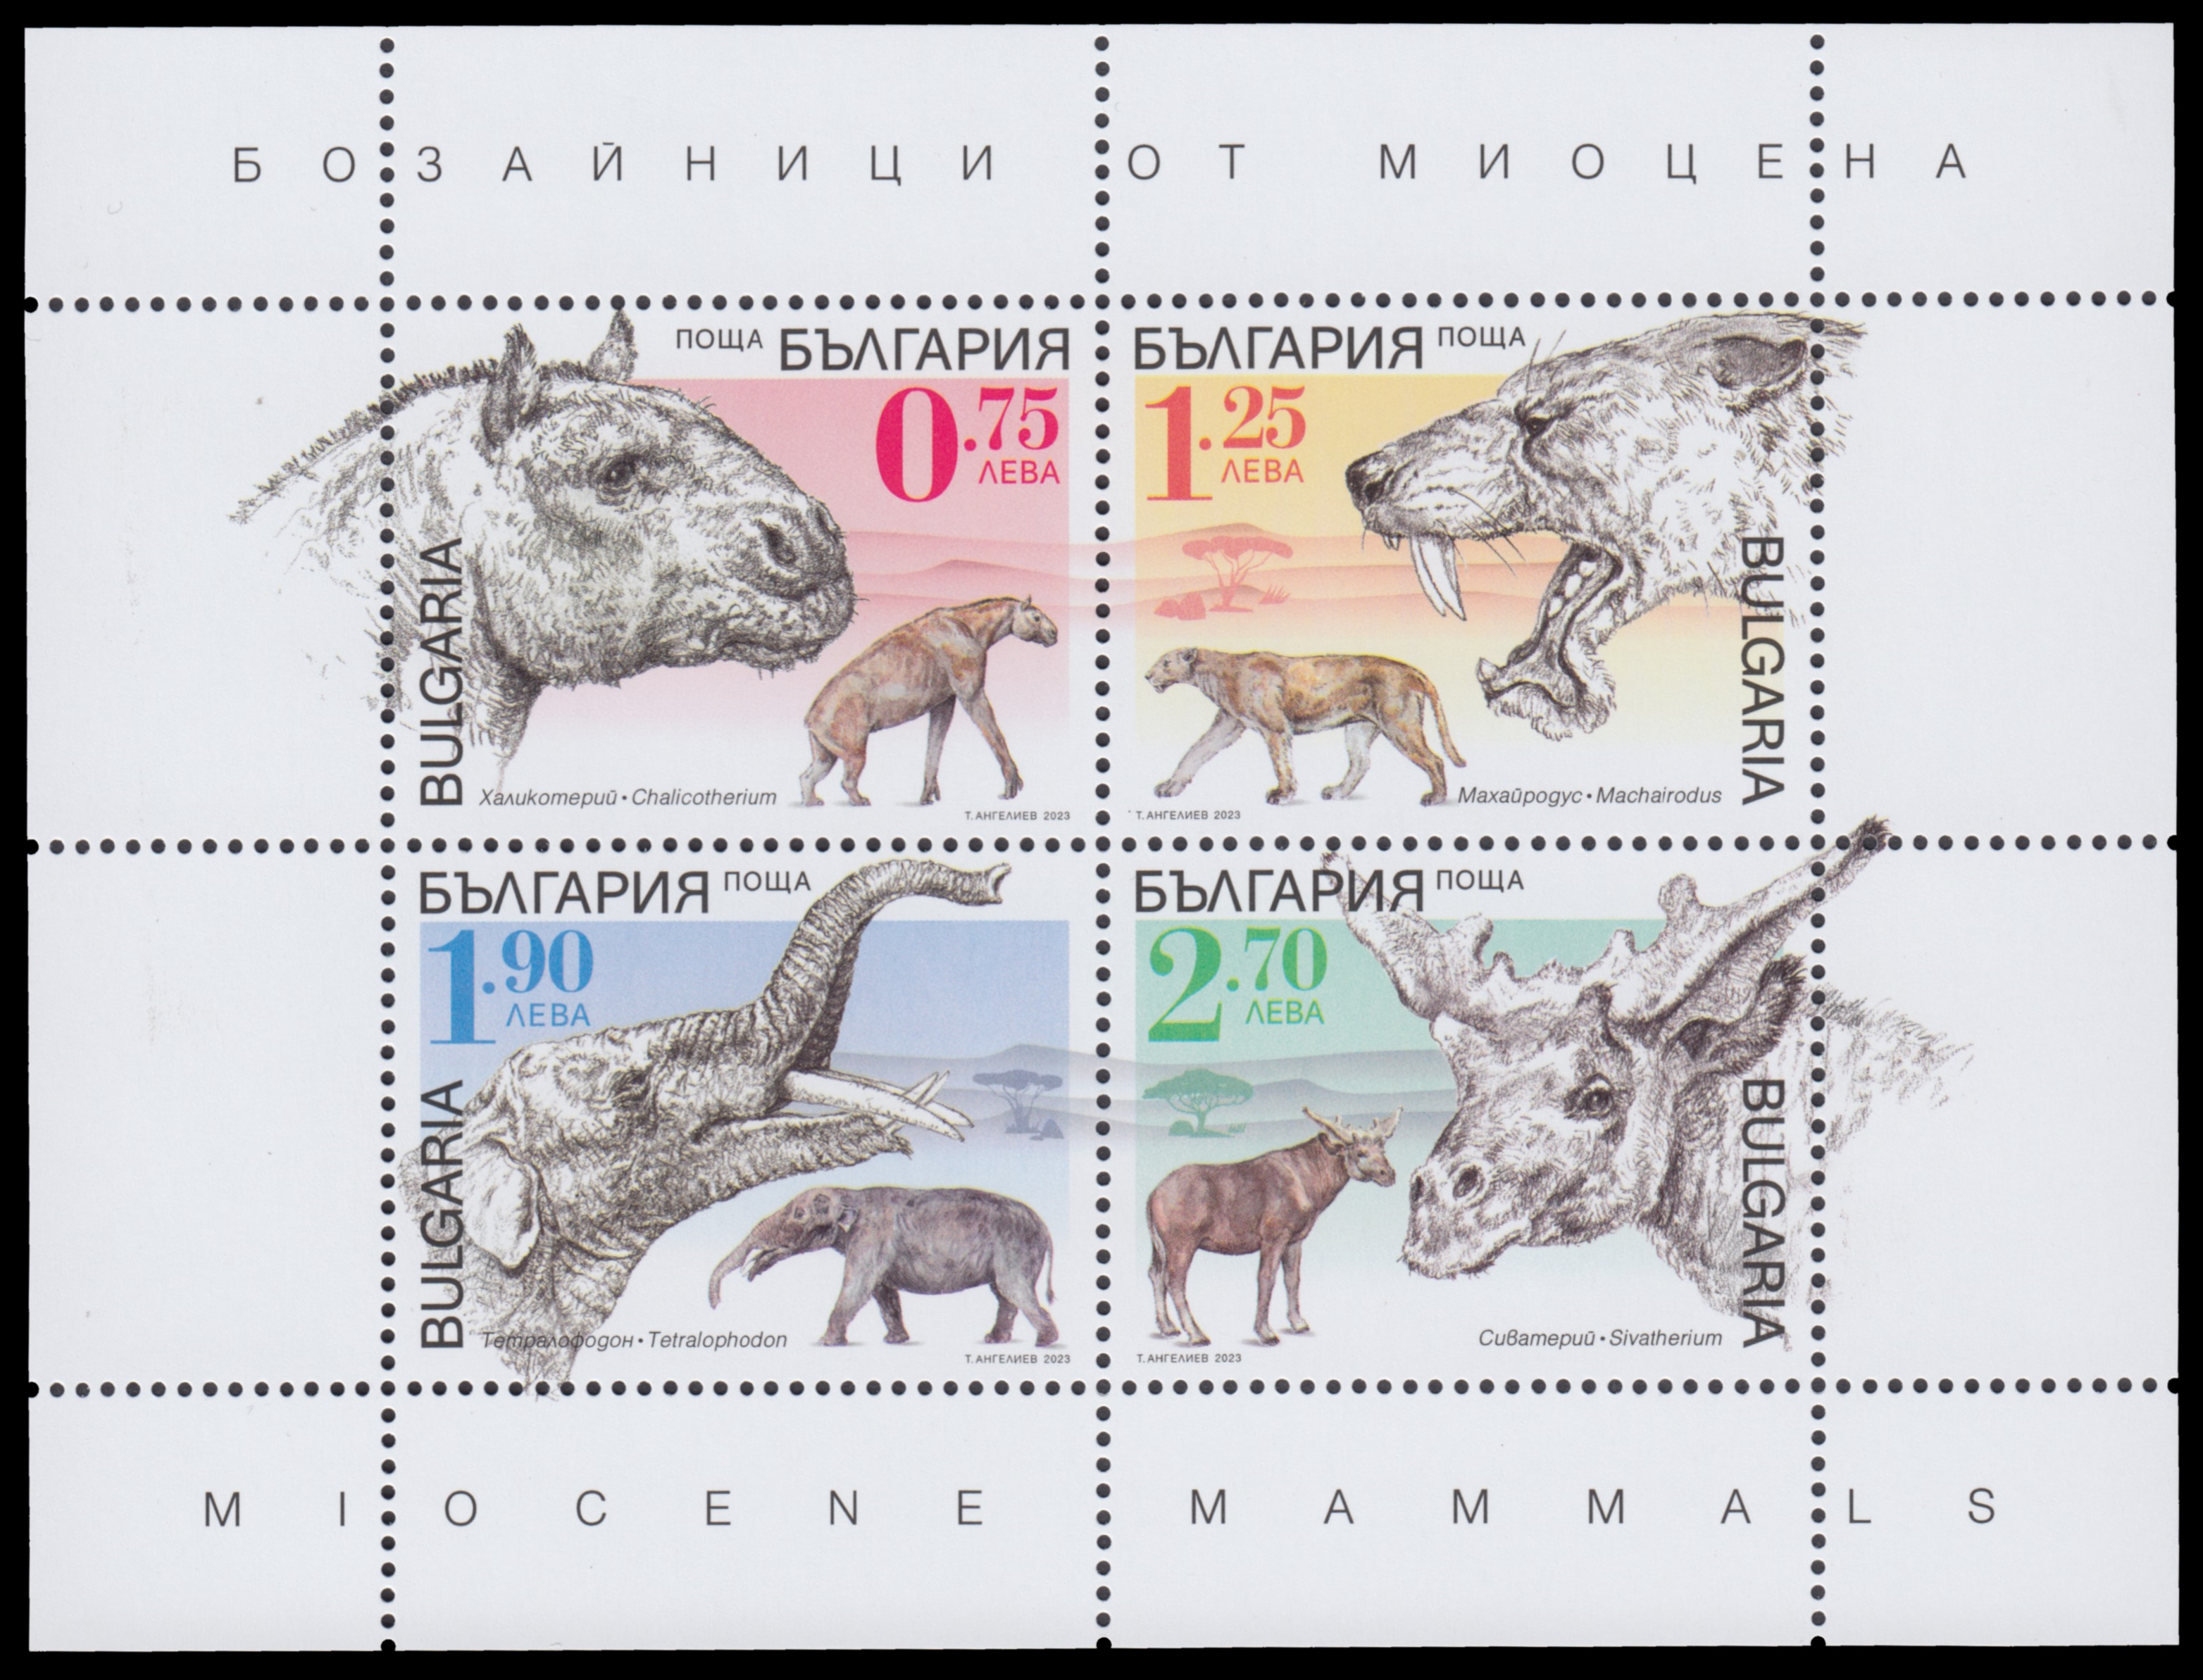 Miocene Mammals on stamps of Bulgaria